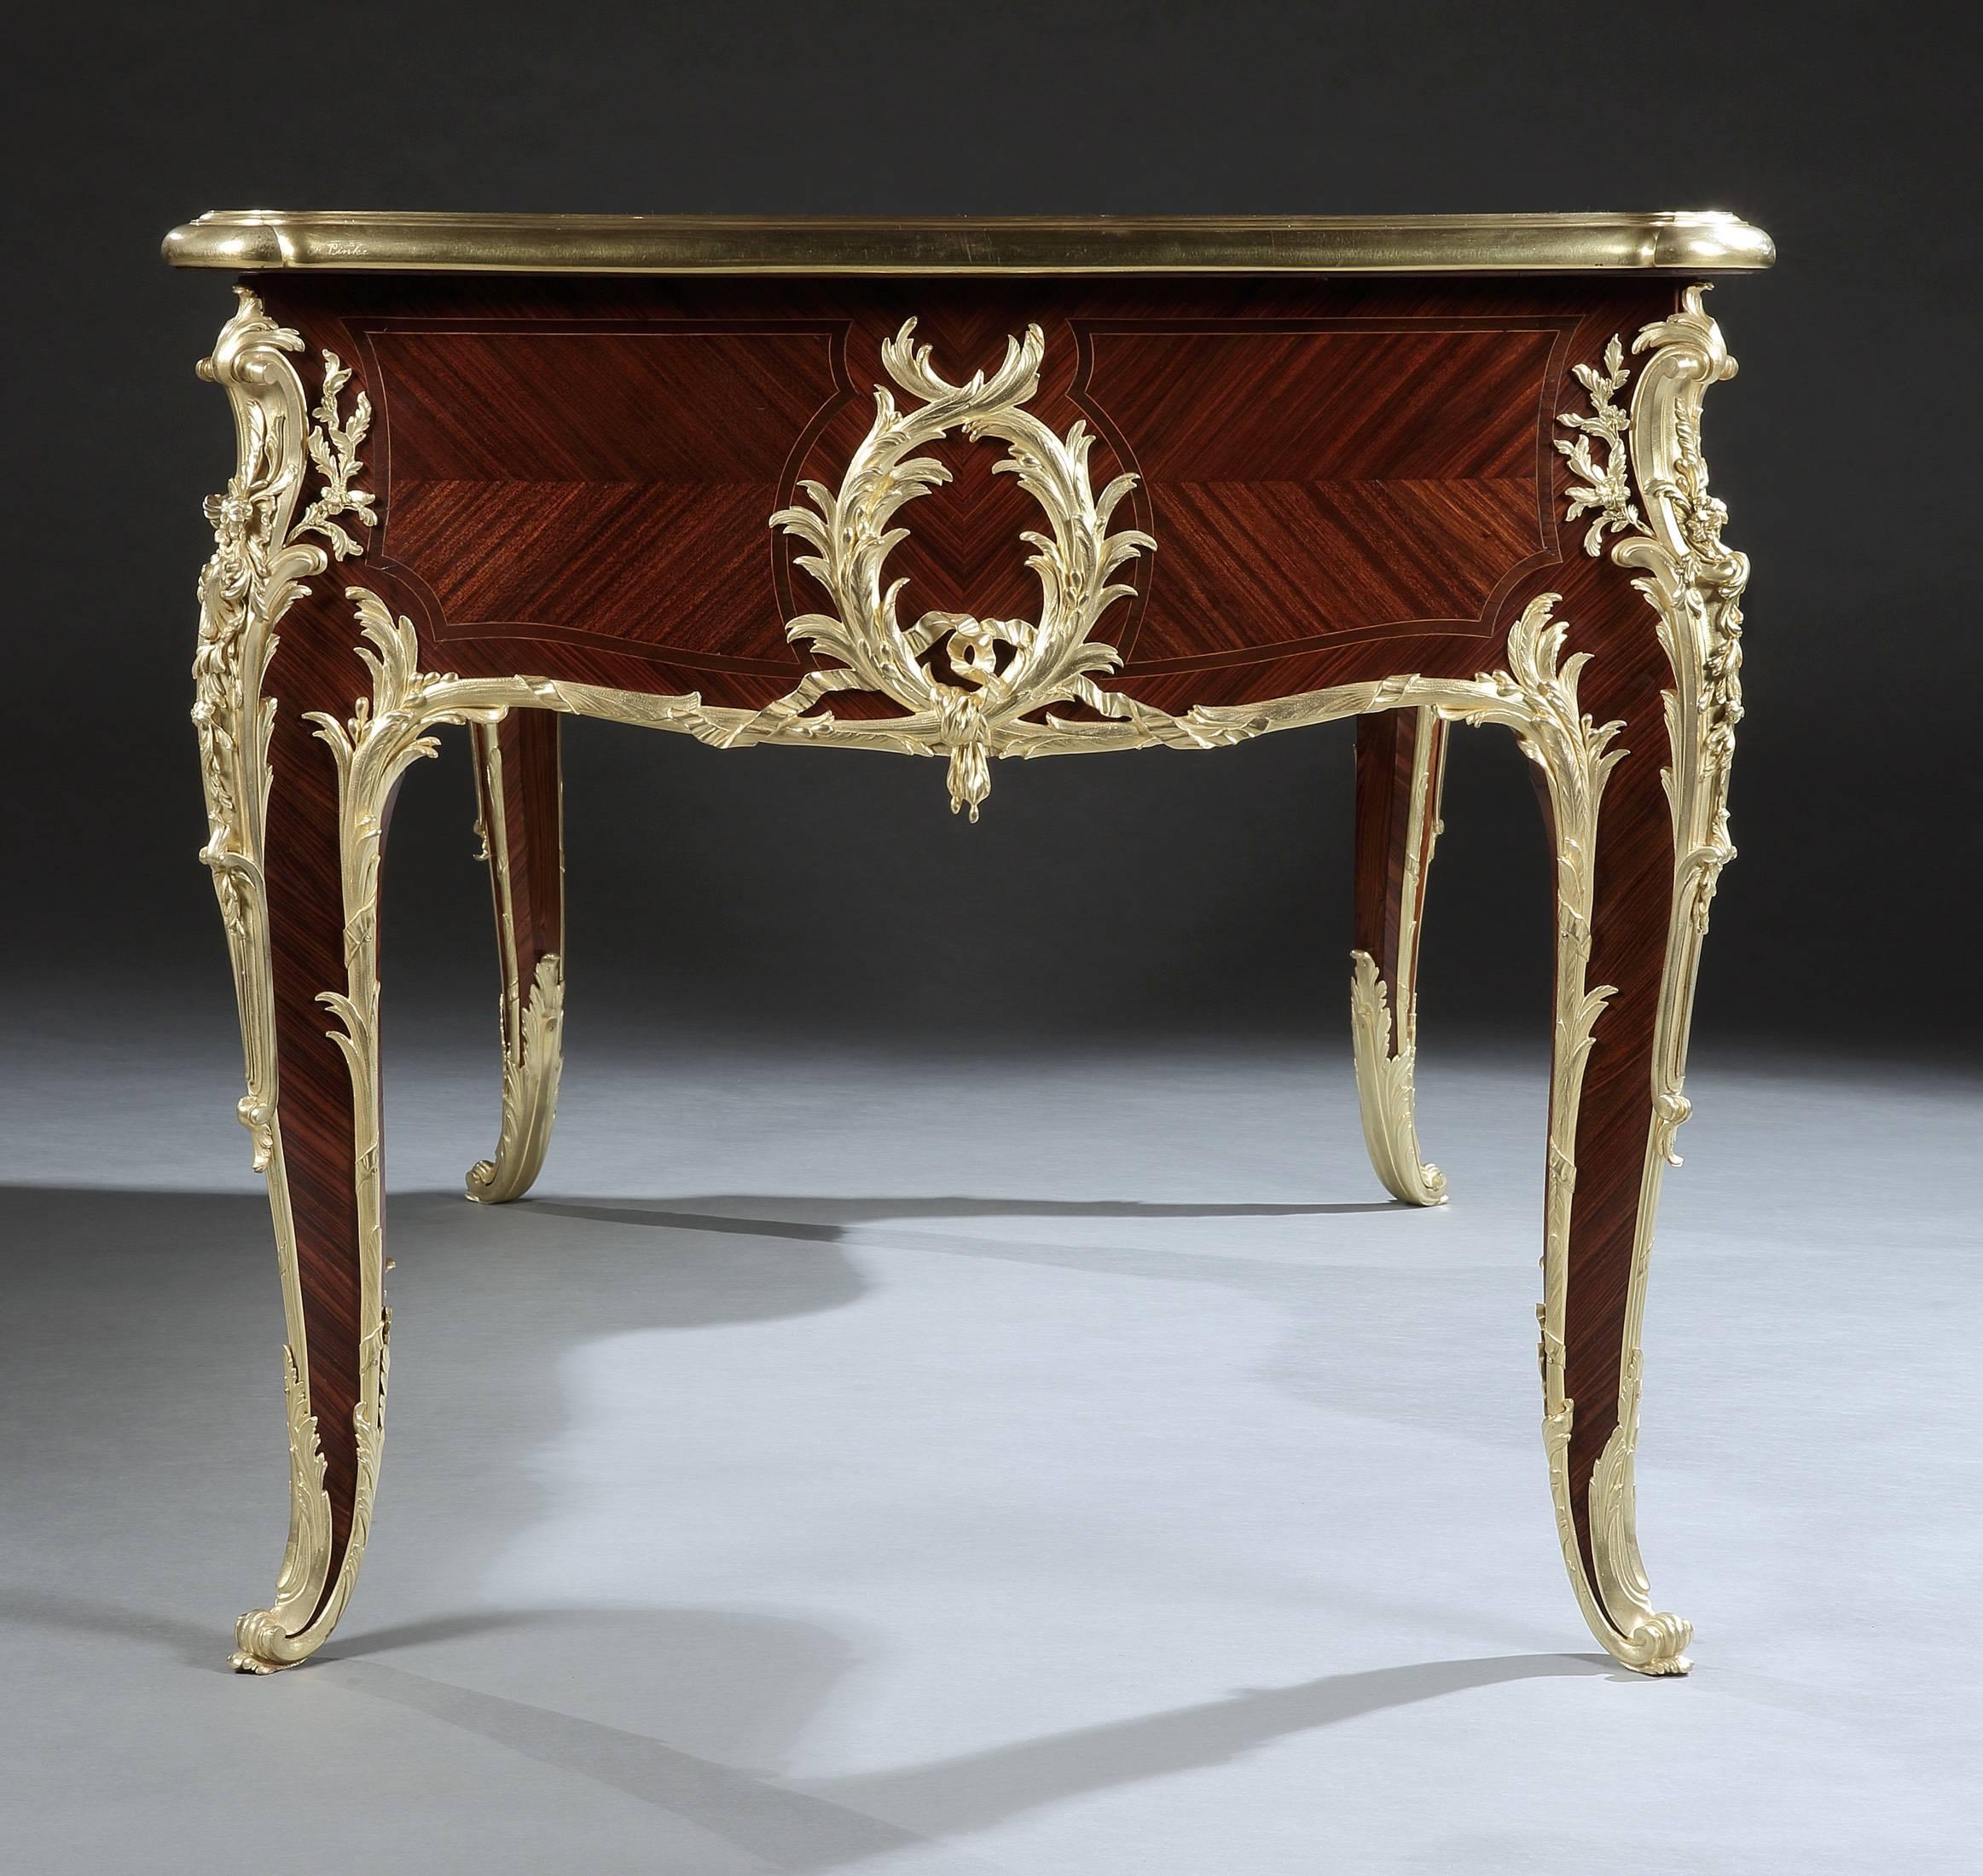 A bureau plat in the Louis XV Style by Françoise Linke.

Of serpentine, kneehole form; constructed in kingwood, and dressed with very fine gilt bronze mounts; rising from cabriole legs dressed with bronze sabots, issuing foliate form mounts